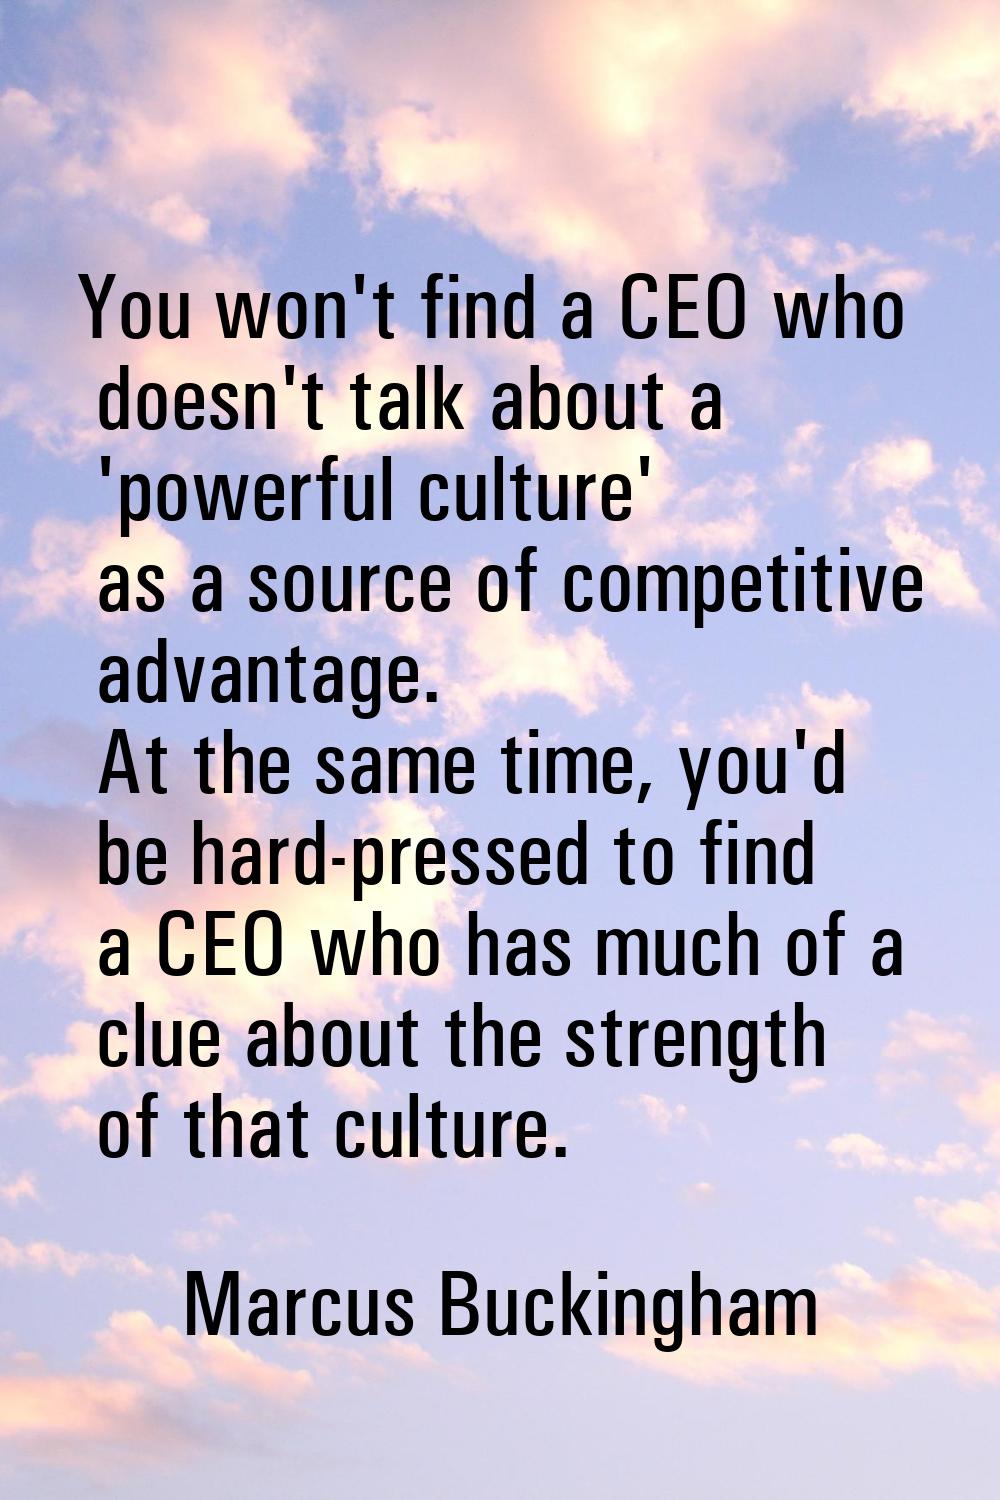 You won't find a CEO who doesn't talk about a 'powerful culture' as a source of competitive advanta